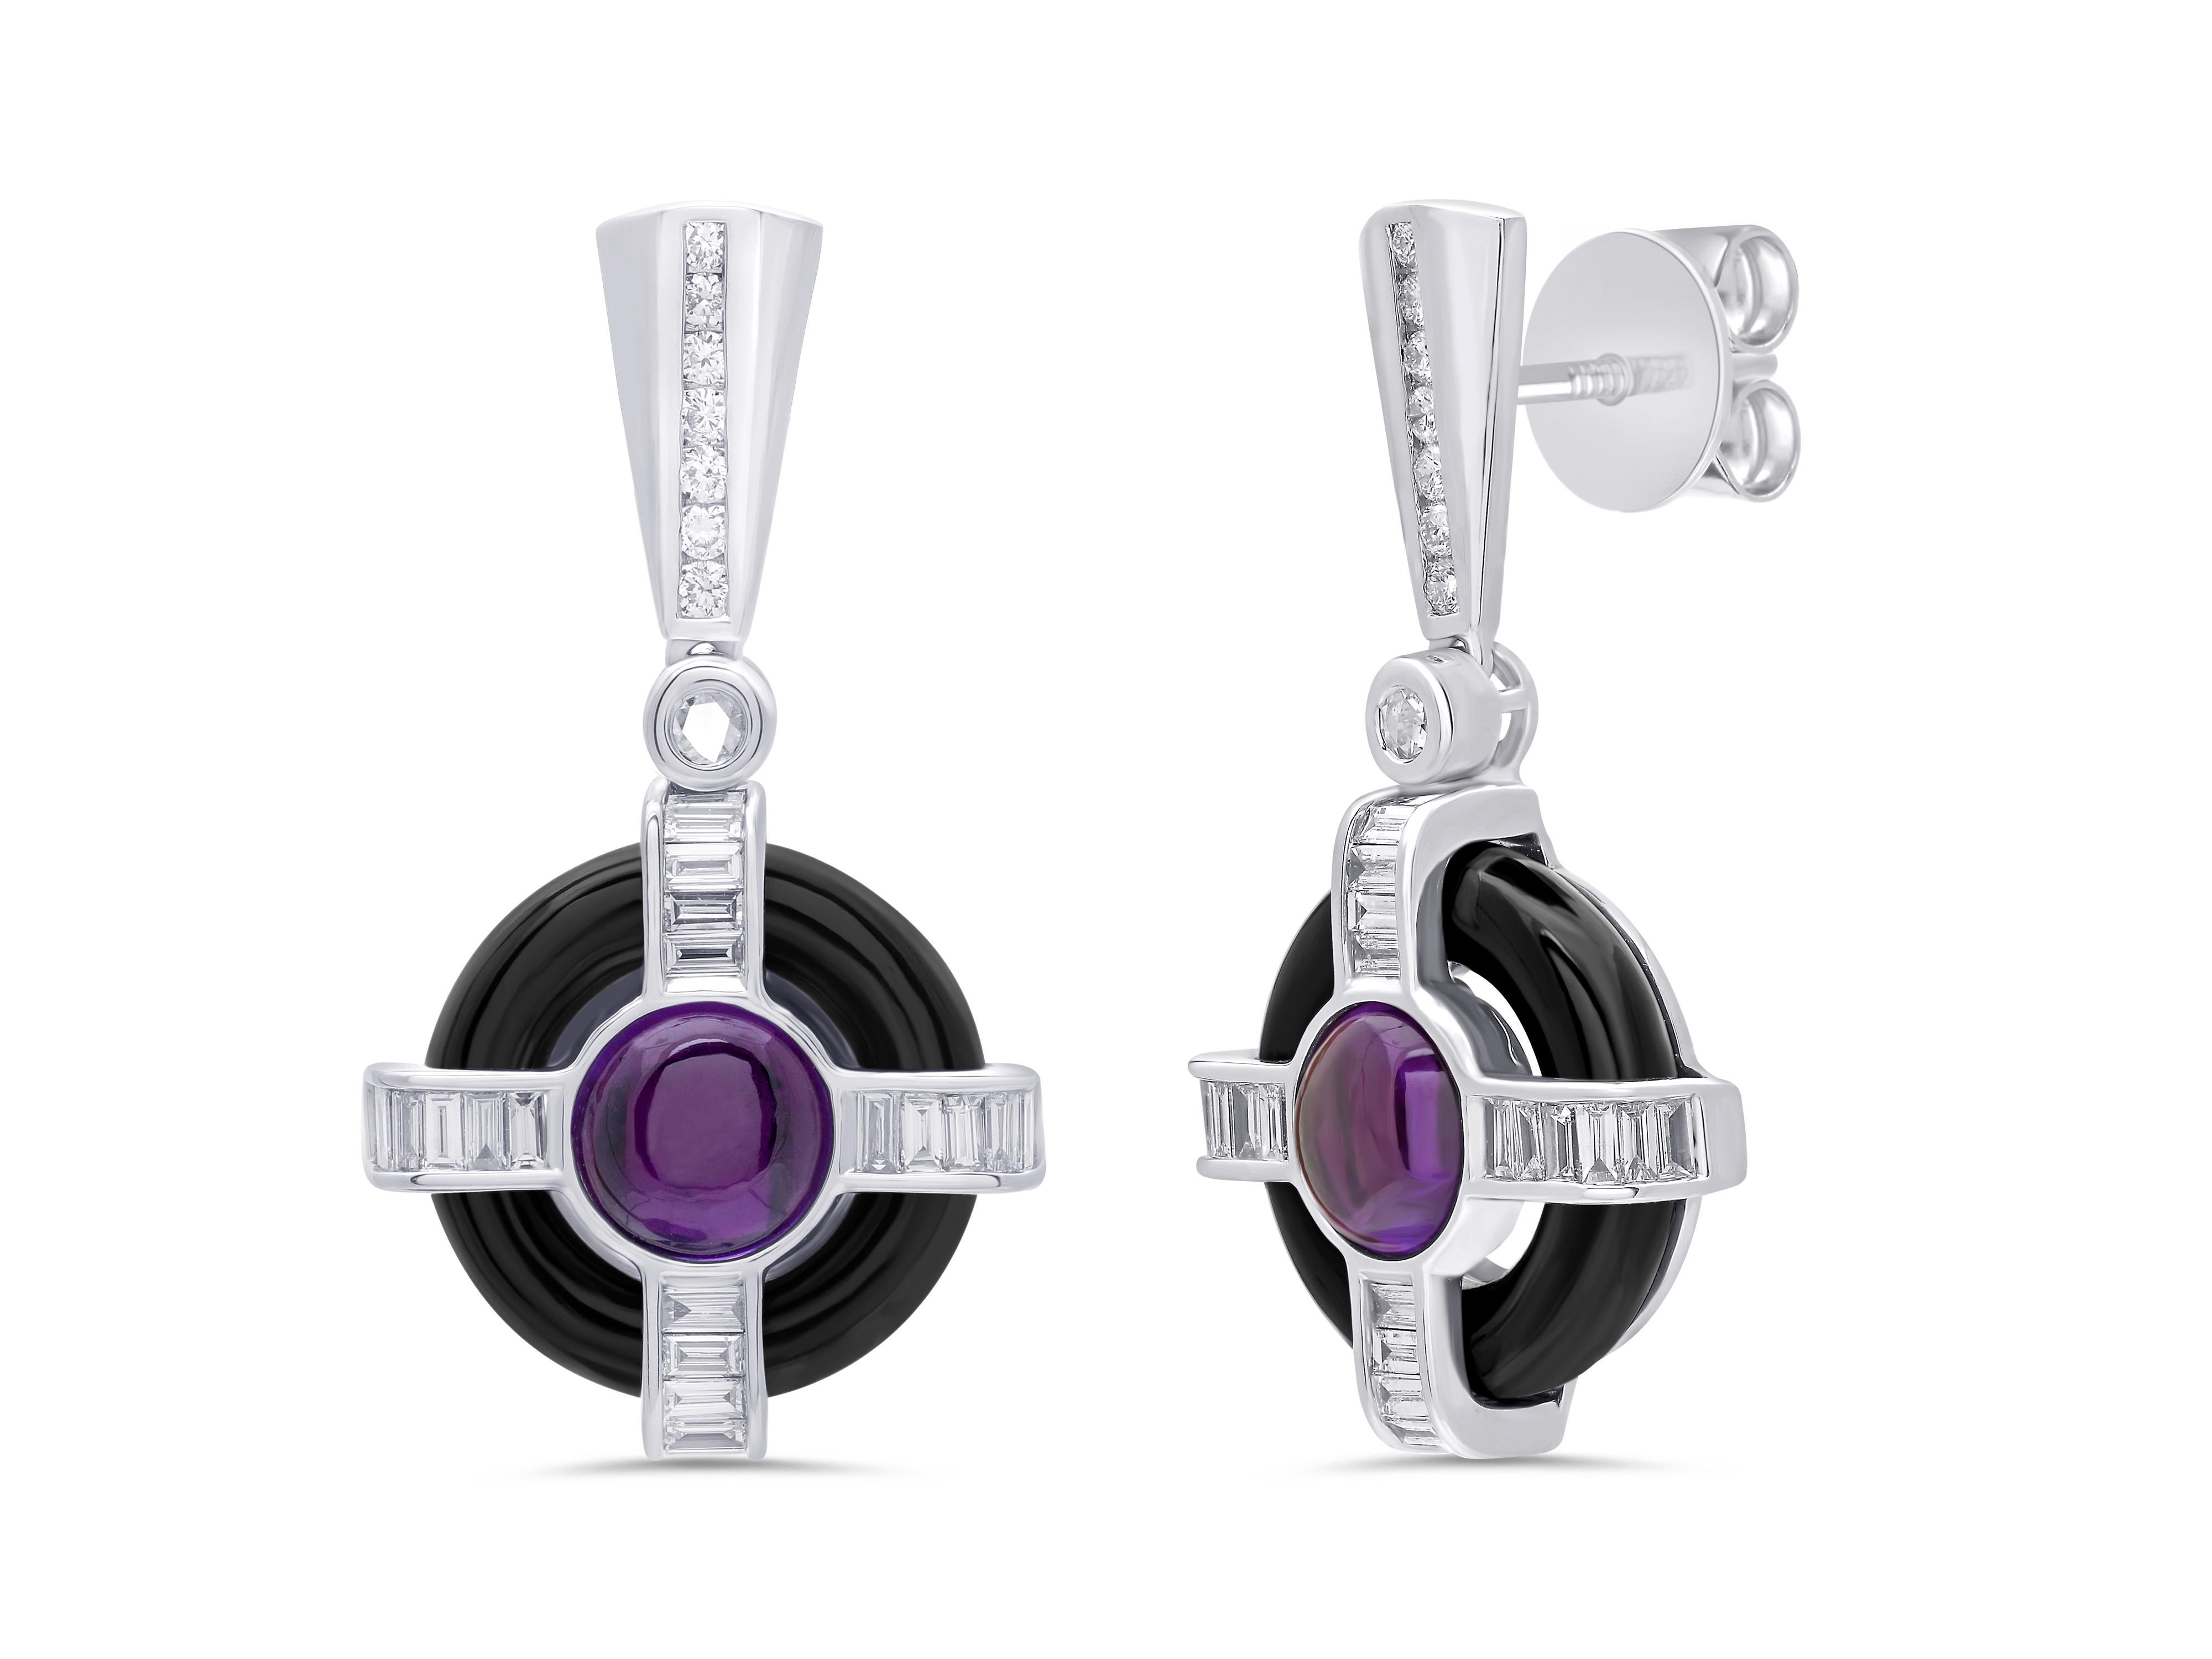 Contrasting colours and a mix of clean lines and smooth curves merge to create the distinctive look of Atelo’s Deco Wheel Collection.

These deco-inspired earrings combine black onyx, baguette (rectangular) diamonds and amethyst to create a striking